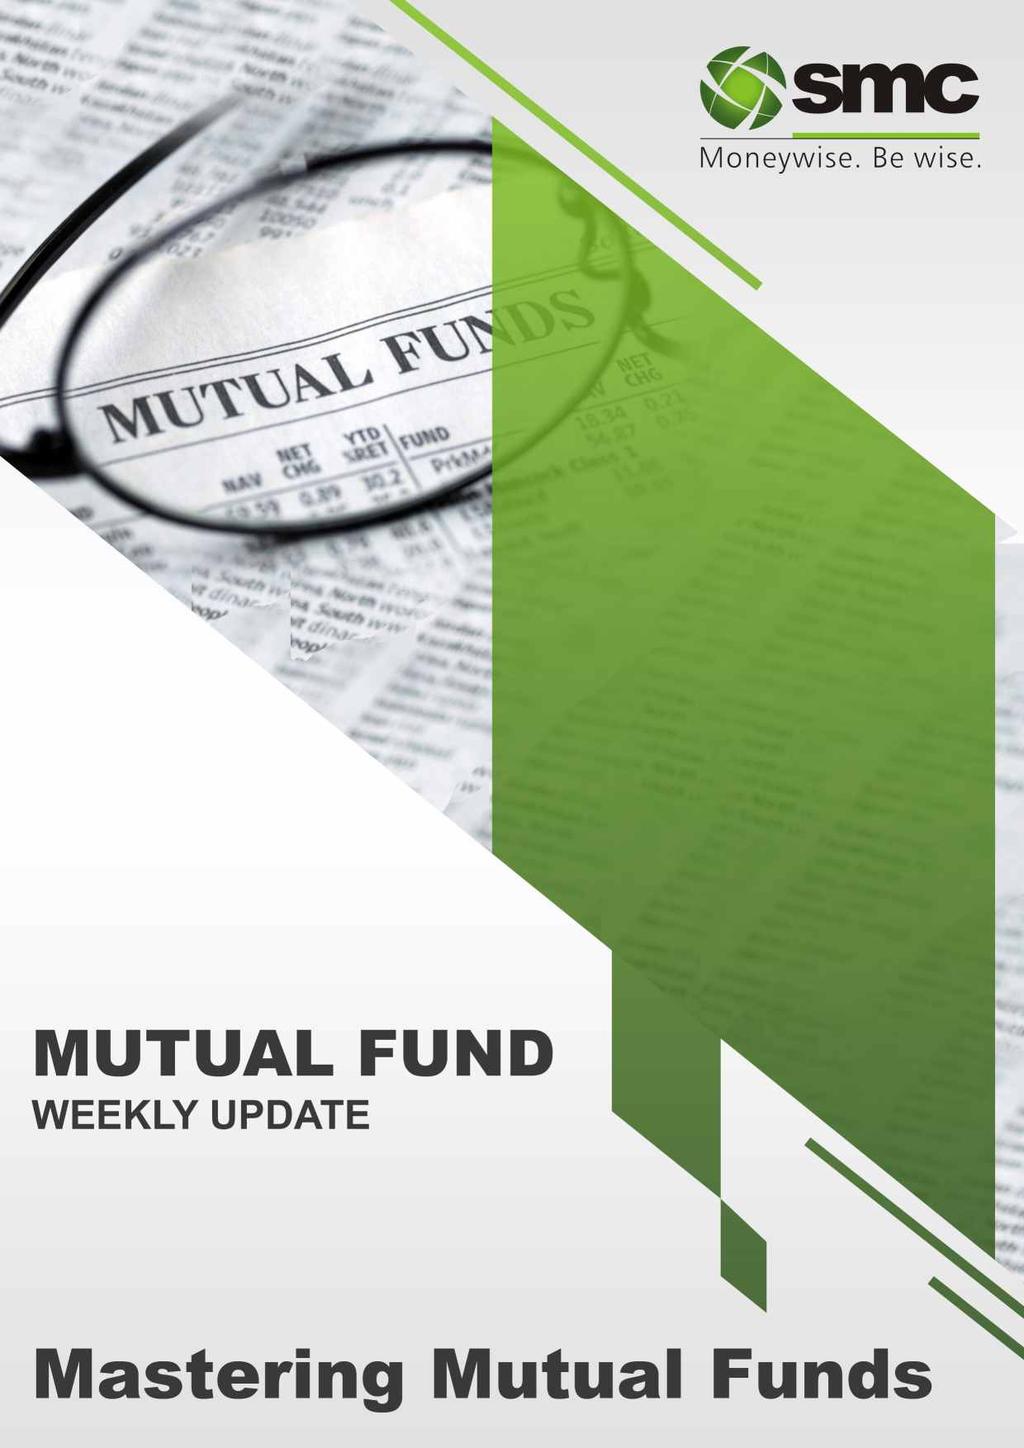 CONTENTS Industry & Fund Update 1 Dividend Declared 3 New Fund Offers 4 Performance of Equity Funds 5